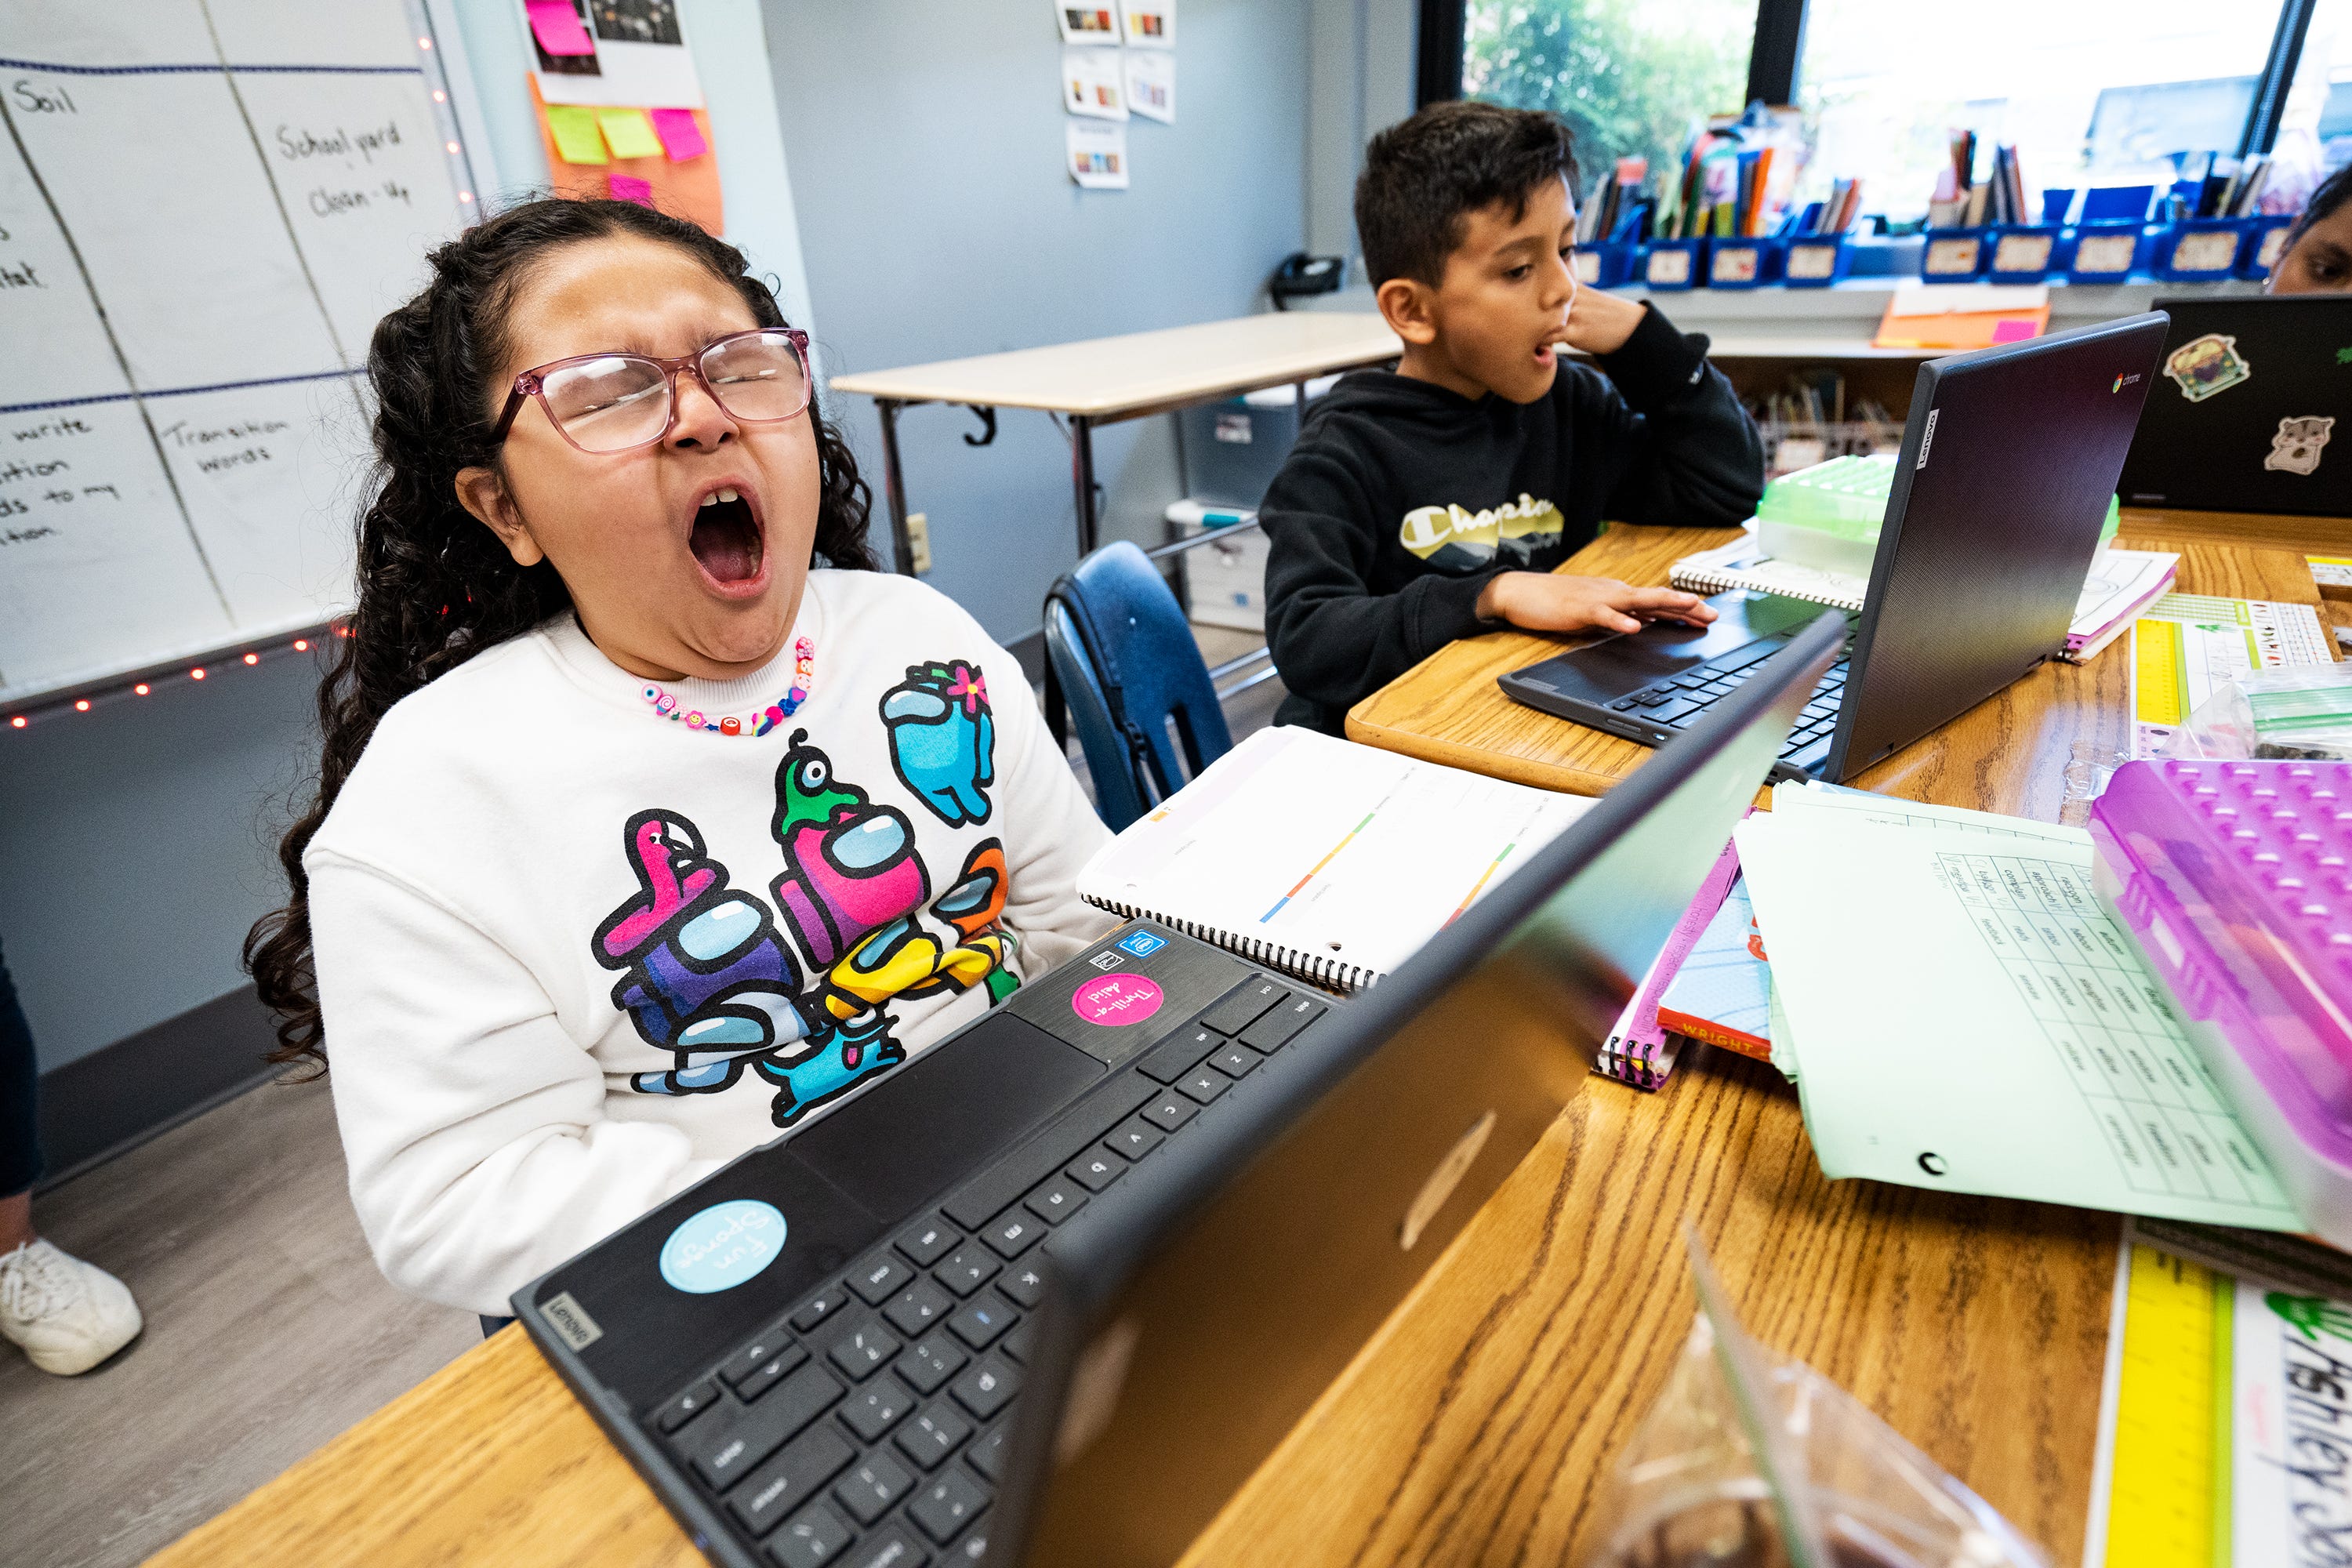 Ashley Soto, a third grader at Cora Kelly School, yawns as she attempts to finish her classwork near the end of the day.